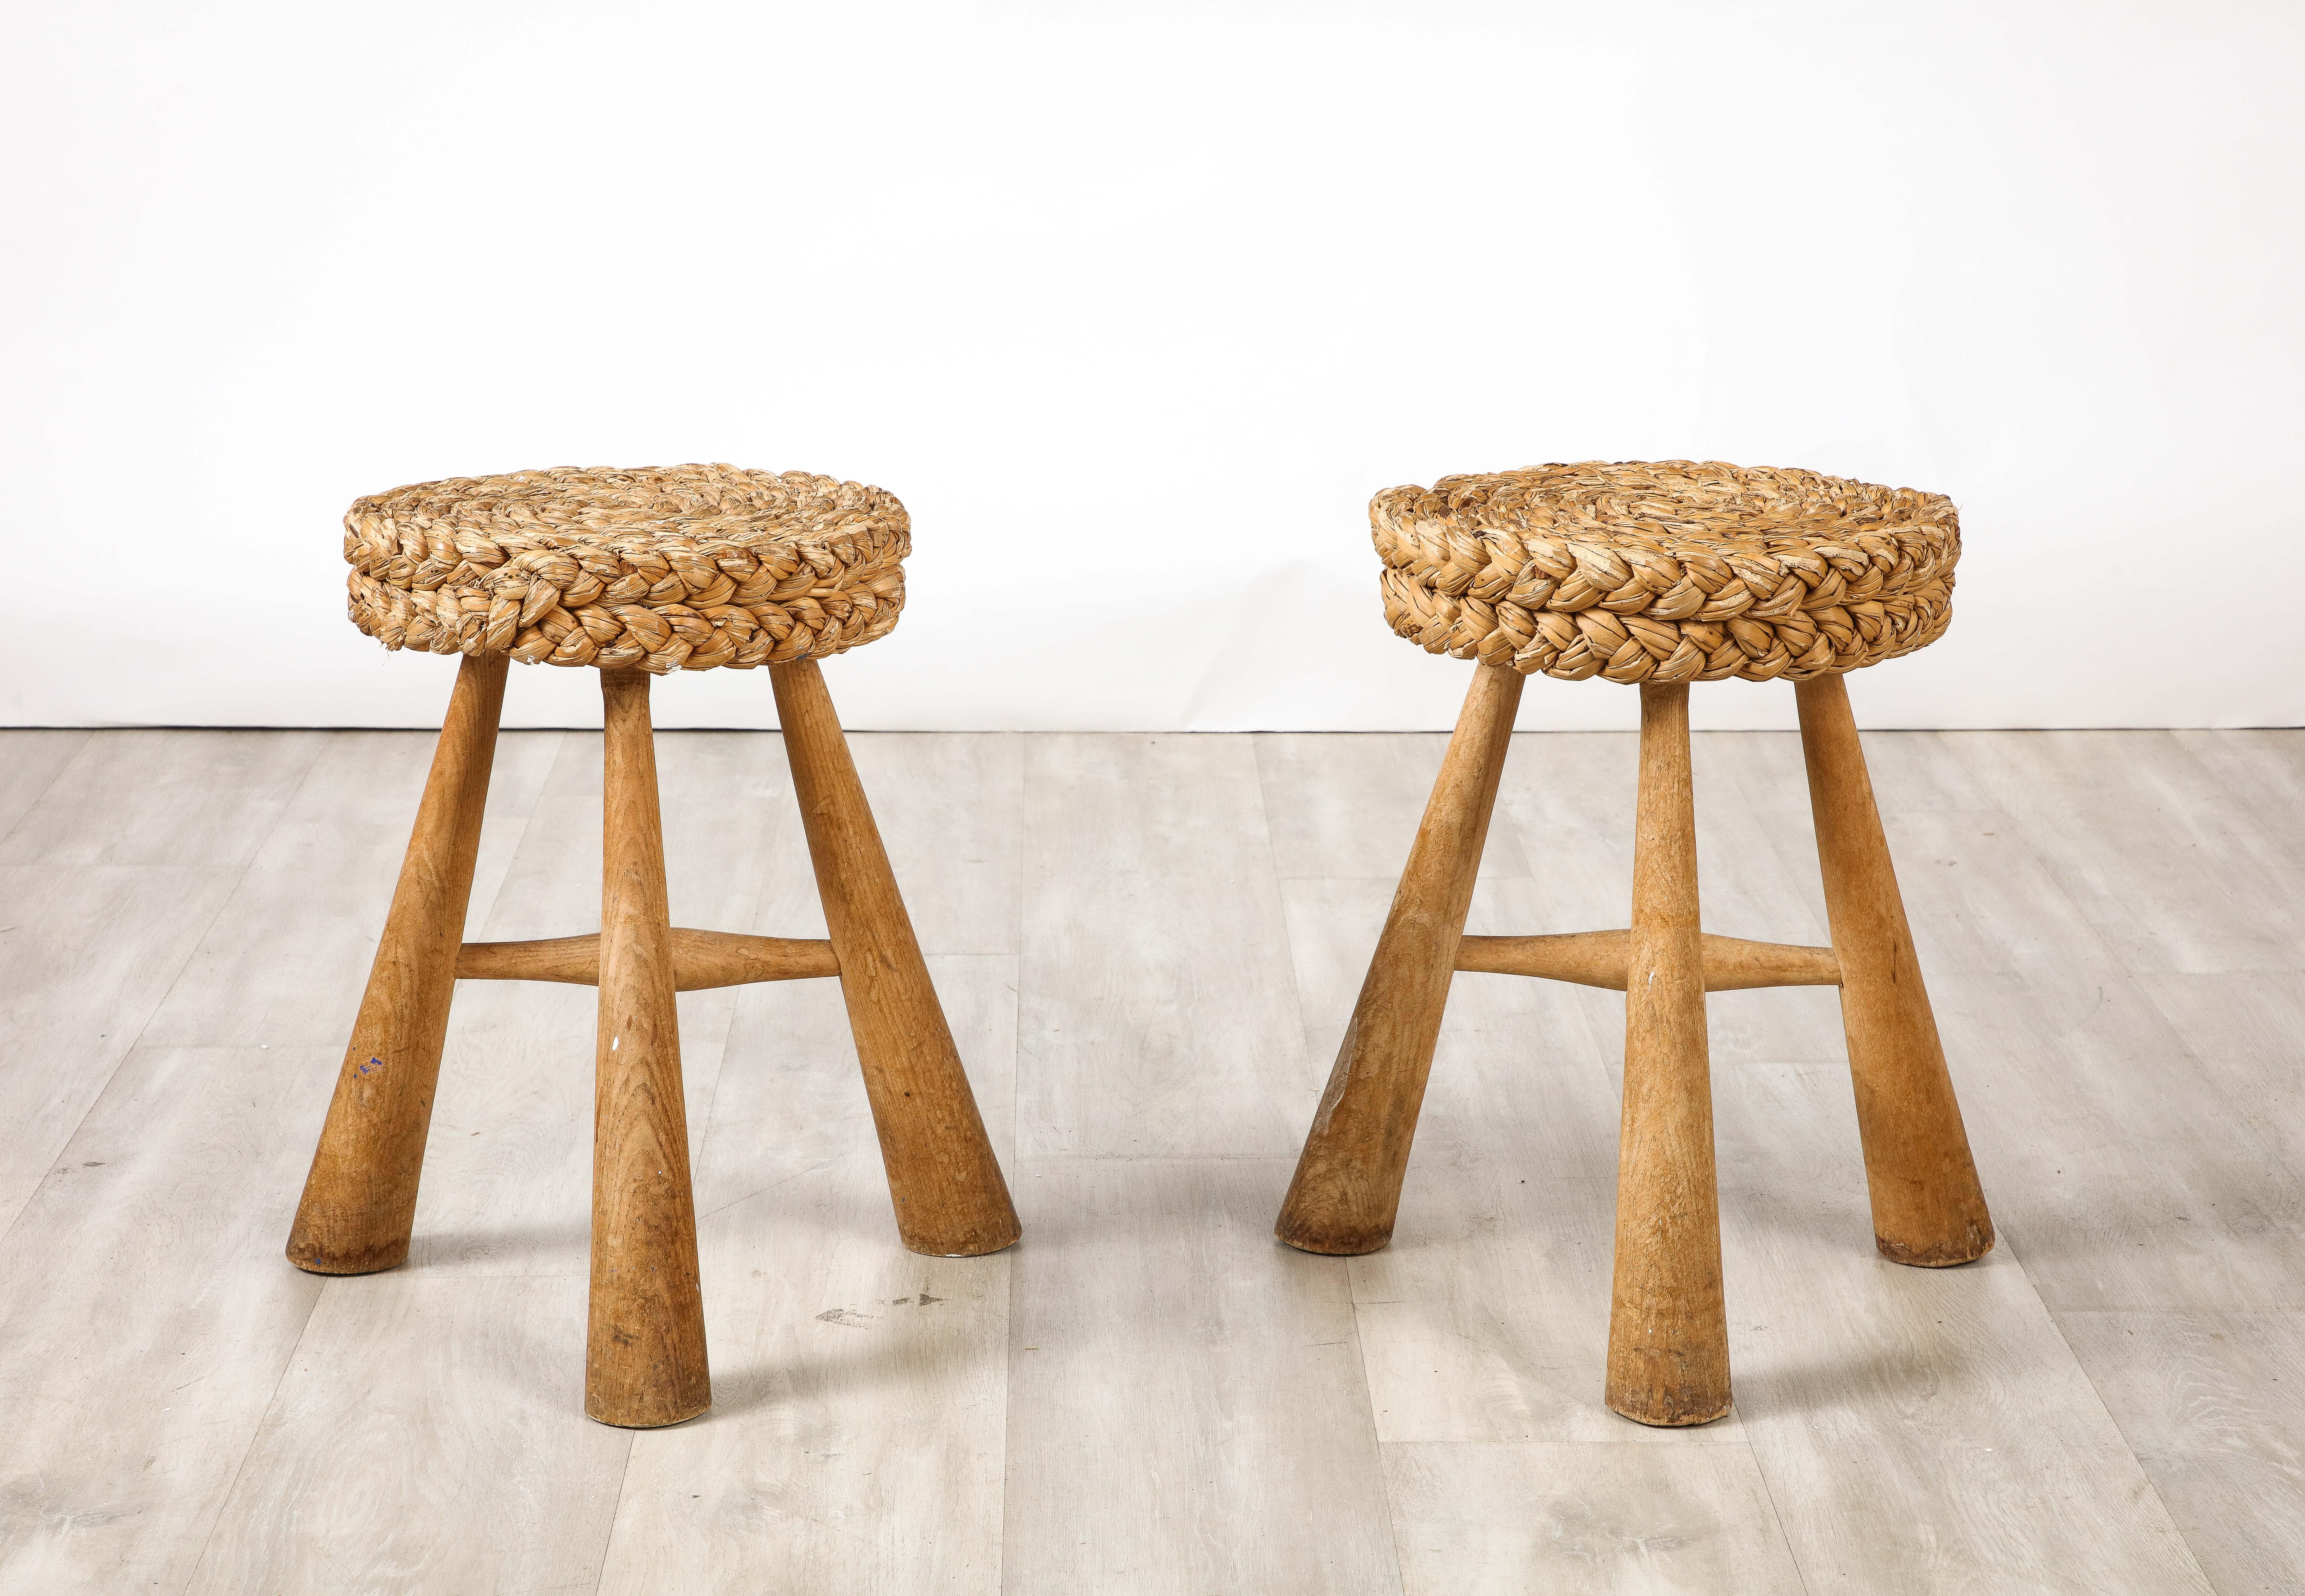 A wonderful pair of stools designed by Adrien Audoux and Frida Minnet with their iconic hand-woven and braided rush circular seats, supported on robust sculpted oak tripod leg bases.  Highly sculptural and iconic suited for any interior style.
by